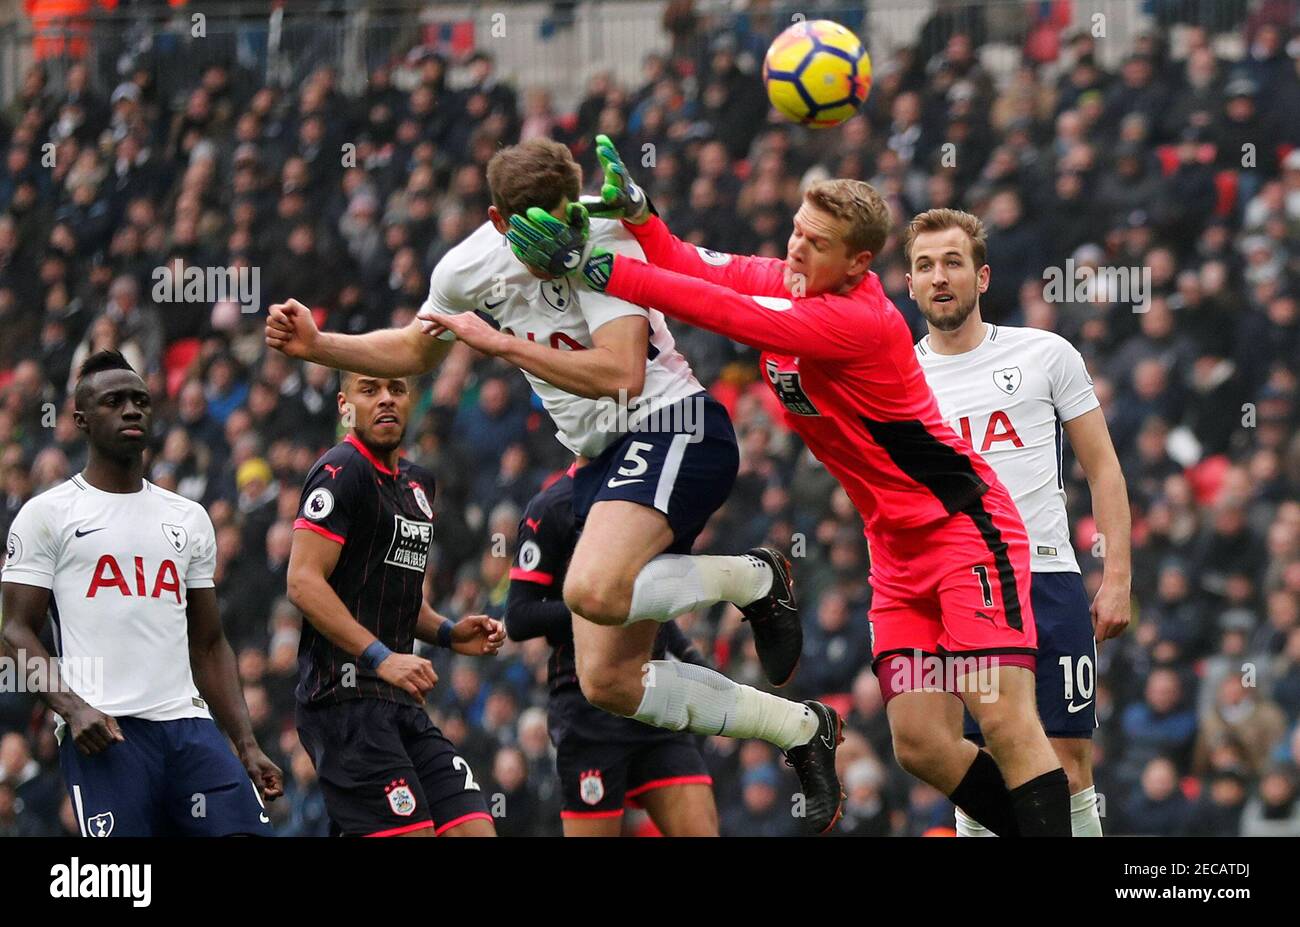 Soccer Football - Premier League - Tottenham Hotspur vs Huddersfield Town - Wembley Stadium, London, Britain - March 3, 2018   Tottenham's Jan Vertonghen in action with Huddersfield Town’s Jonas Lossl as he scores a goal that was later disallowed   REUTERS/Eddie Keogh    EDITORIAL USE ONLY. No use with unauthorized audio, video, data, fixture lists, club/league logos or 'live' services. Online in-match use limited to 75 images, no video emulation. No use in betting, games or single club/league/player publications.  Please contact your account representative for further details. Stock Photo